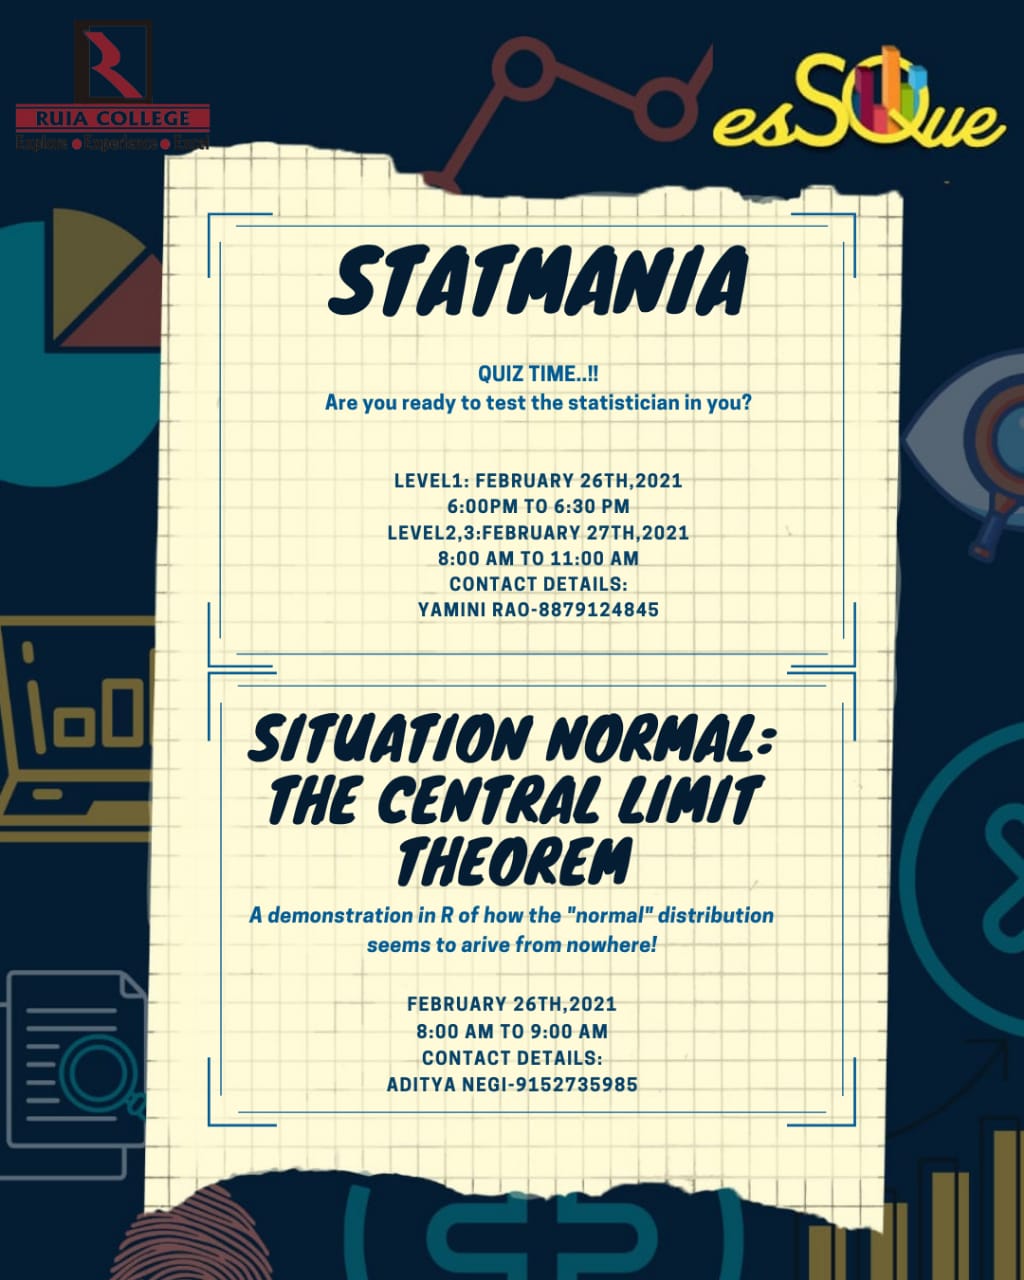 STATMANIA & SITUATION NORMAL: THE CENTRAL LIMIT THEOREM